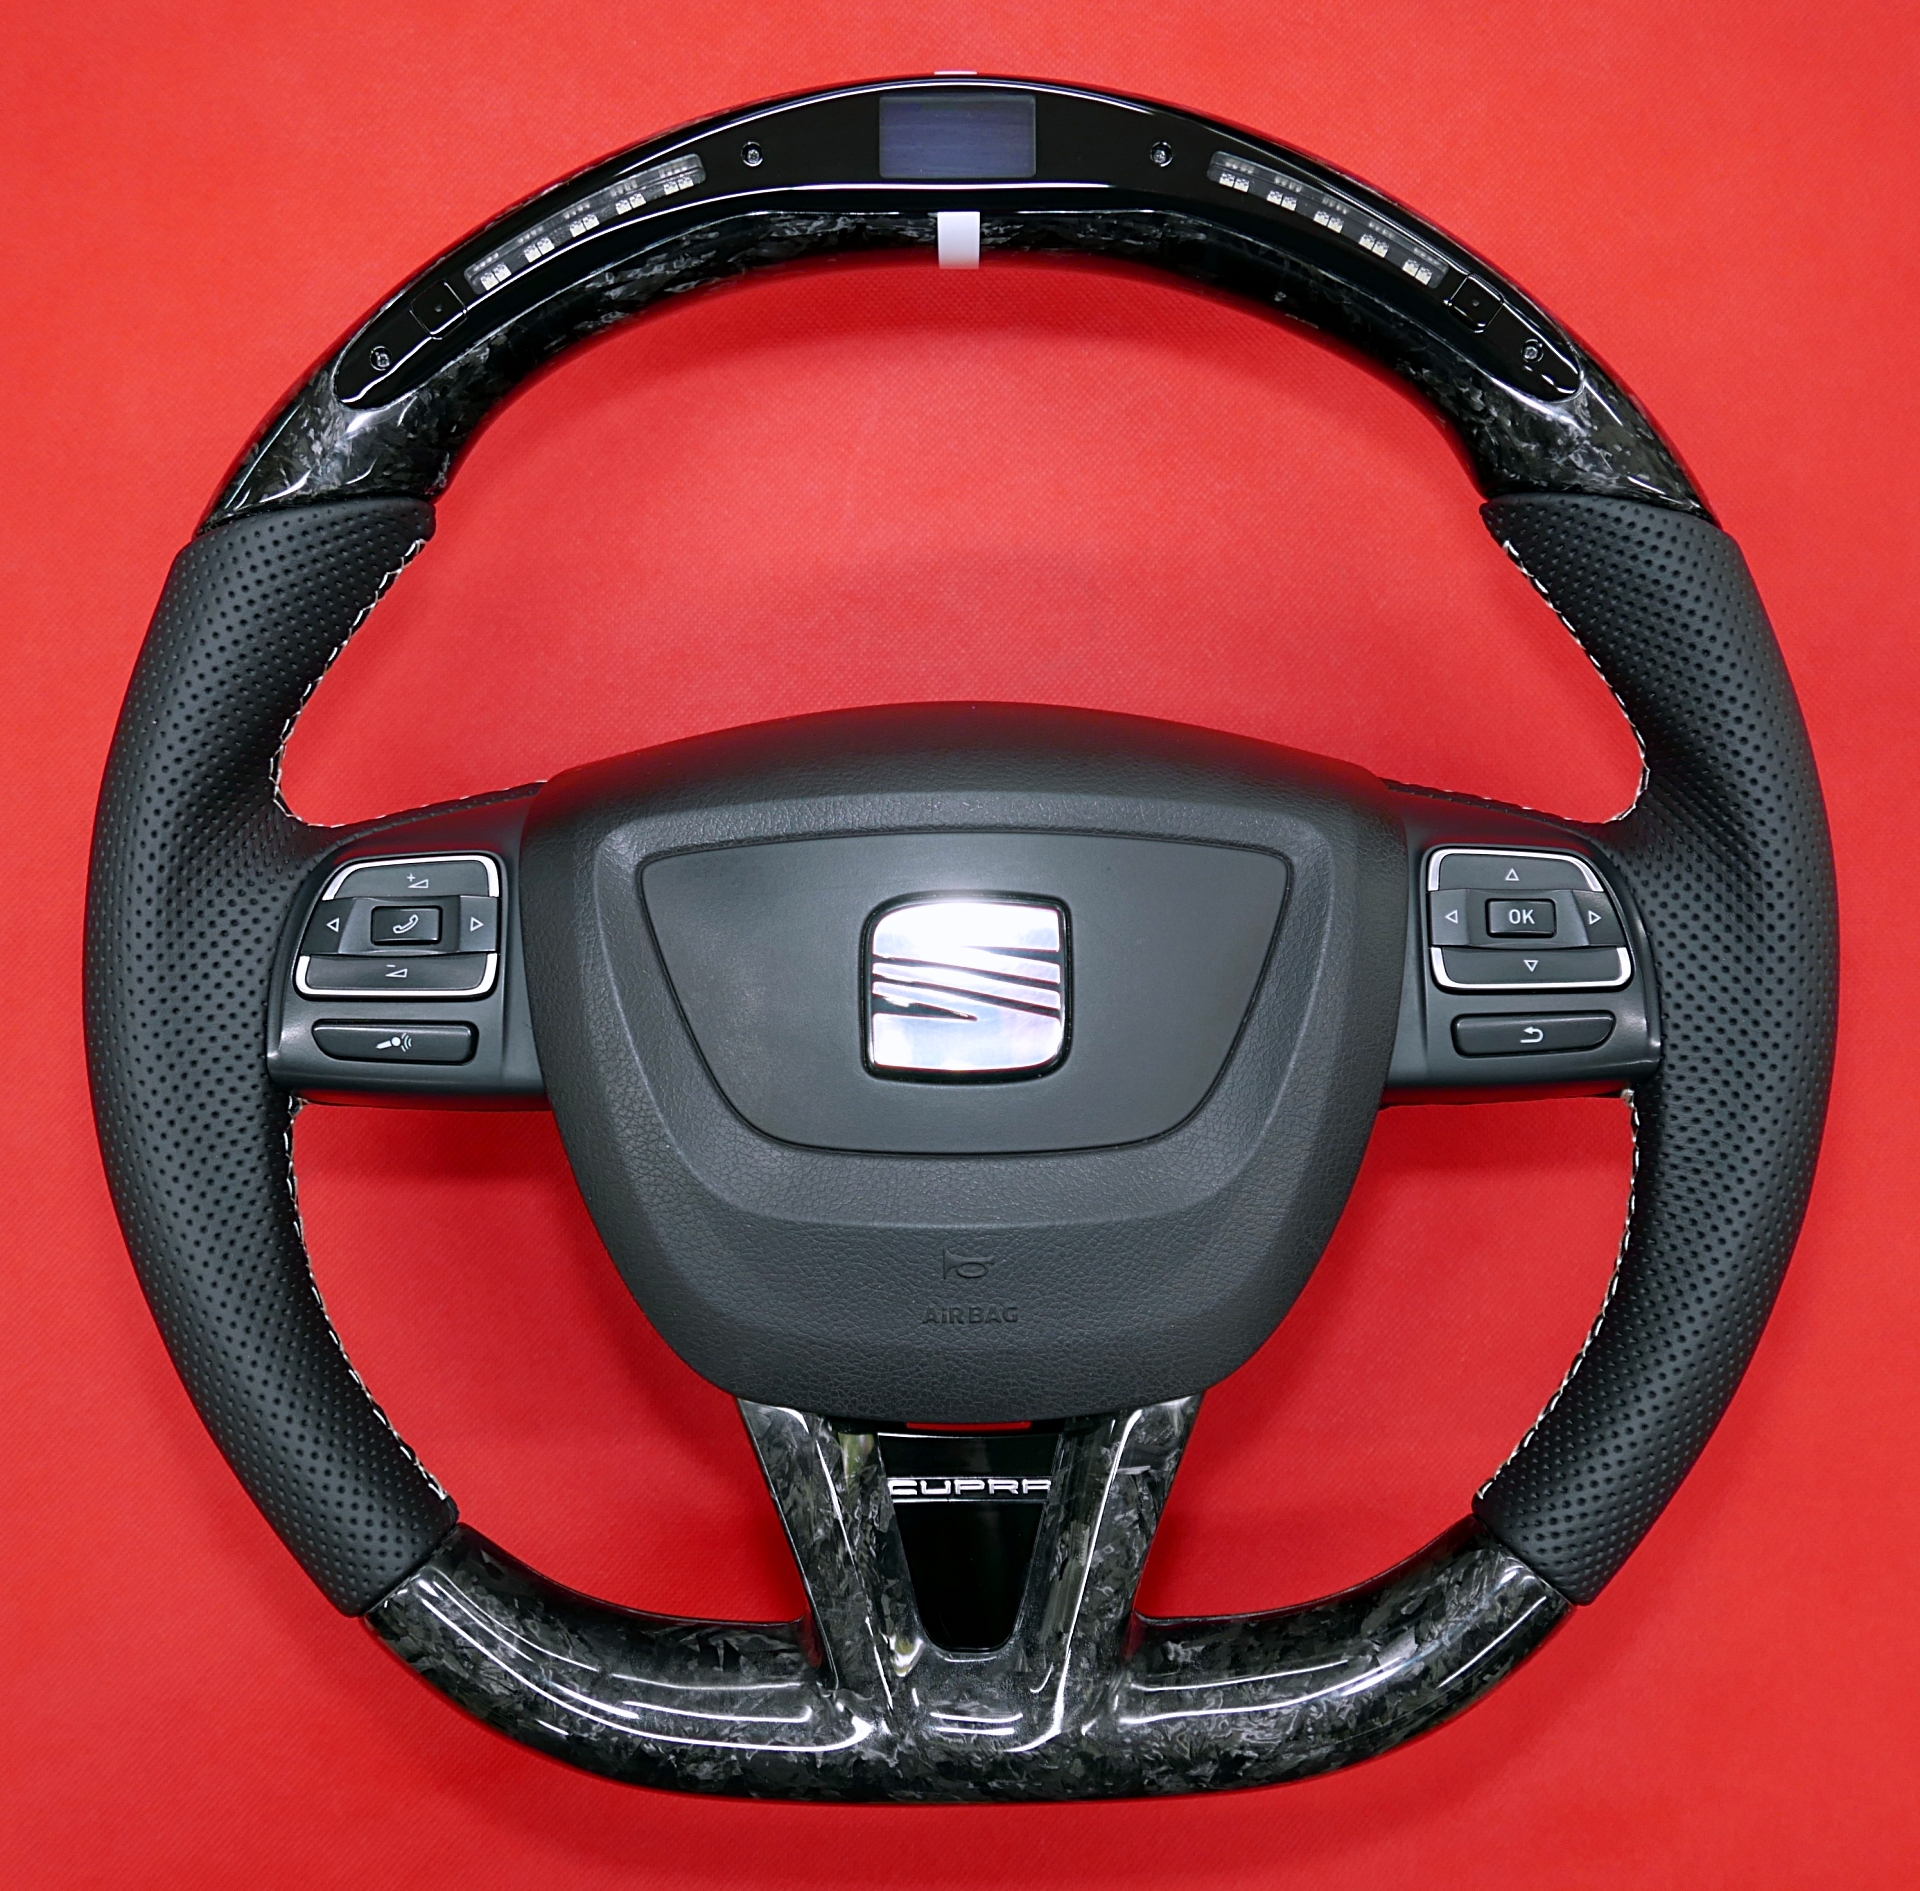 Carbon Fiber Steering Wheel and LED Screen